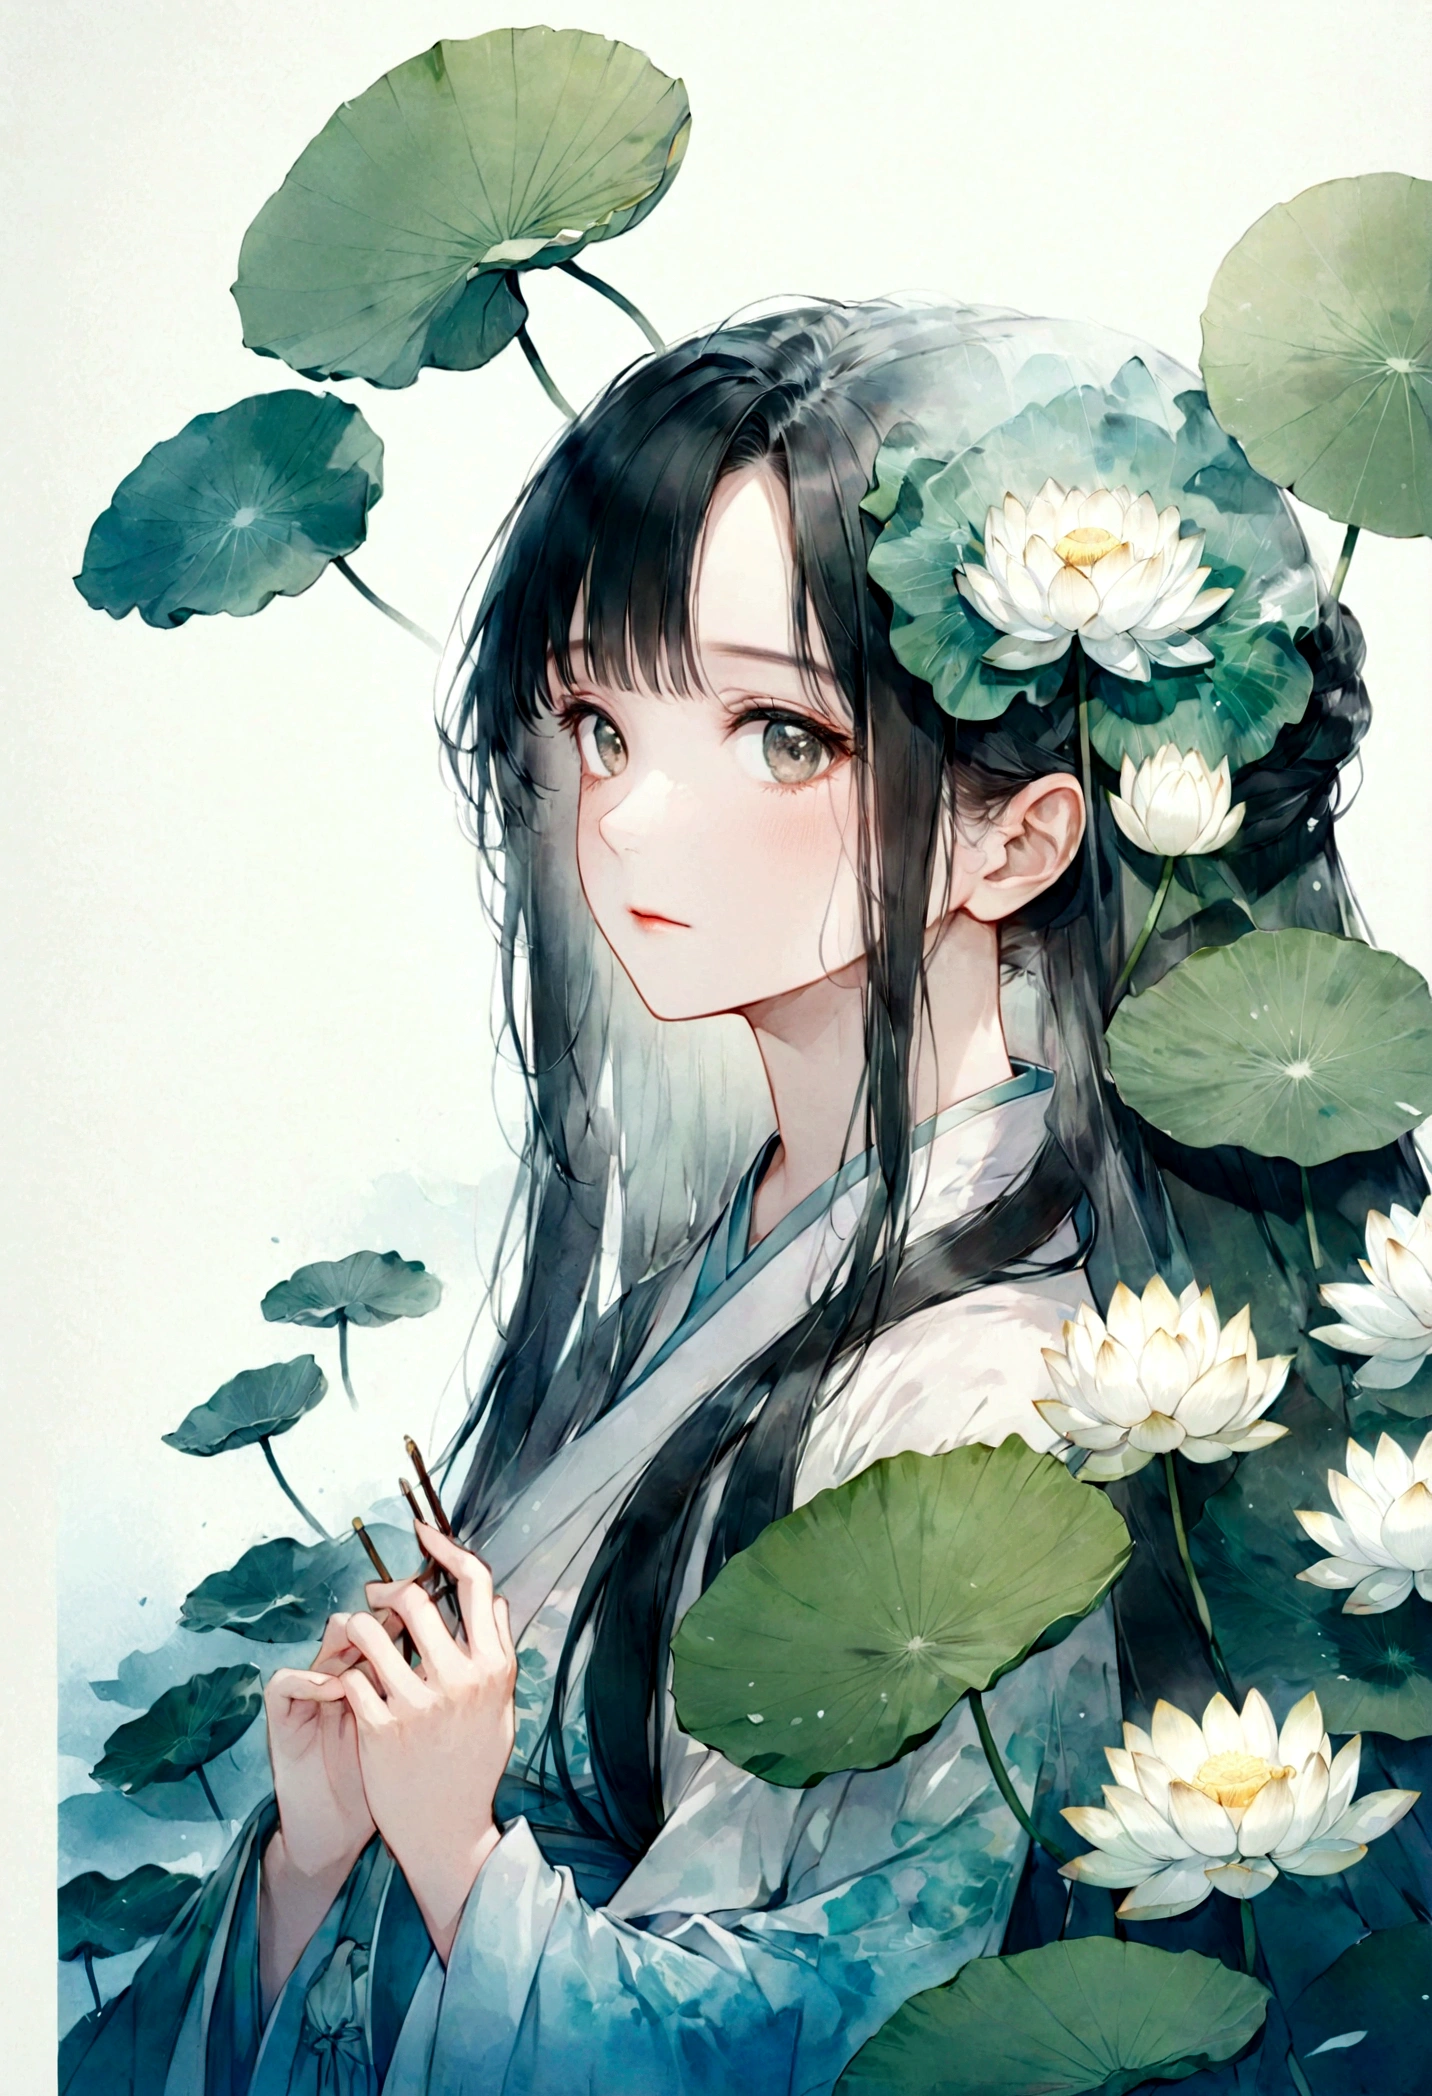    Double exposure flat vector of a beautiful and detailed girl with long hair wearing Chinese Hanfu(Face clear, beautiful and perfect)image ( Perfect anatomy ) ，The background is huge white lotus flowers and huge lotus leaves(Translucent white lotus lotus leaves) perfect, Beautifully, Intricate ink illustration style,   Dreamy ethereal artwork conceptual artwork masterpiece, best quality, Super detailed, High quality meticulous watercolor style flat vector 

                          